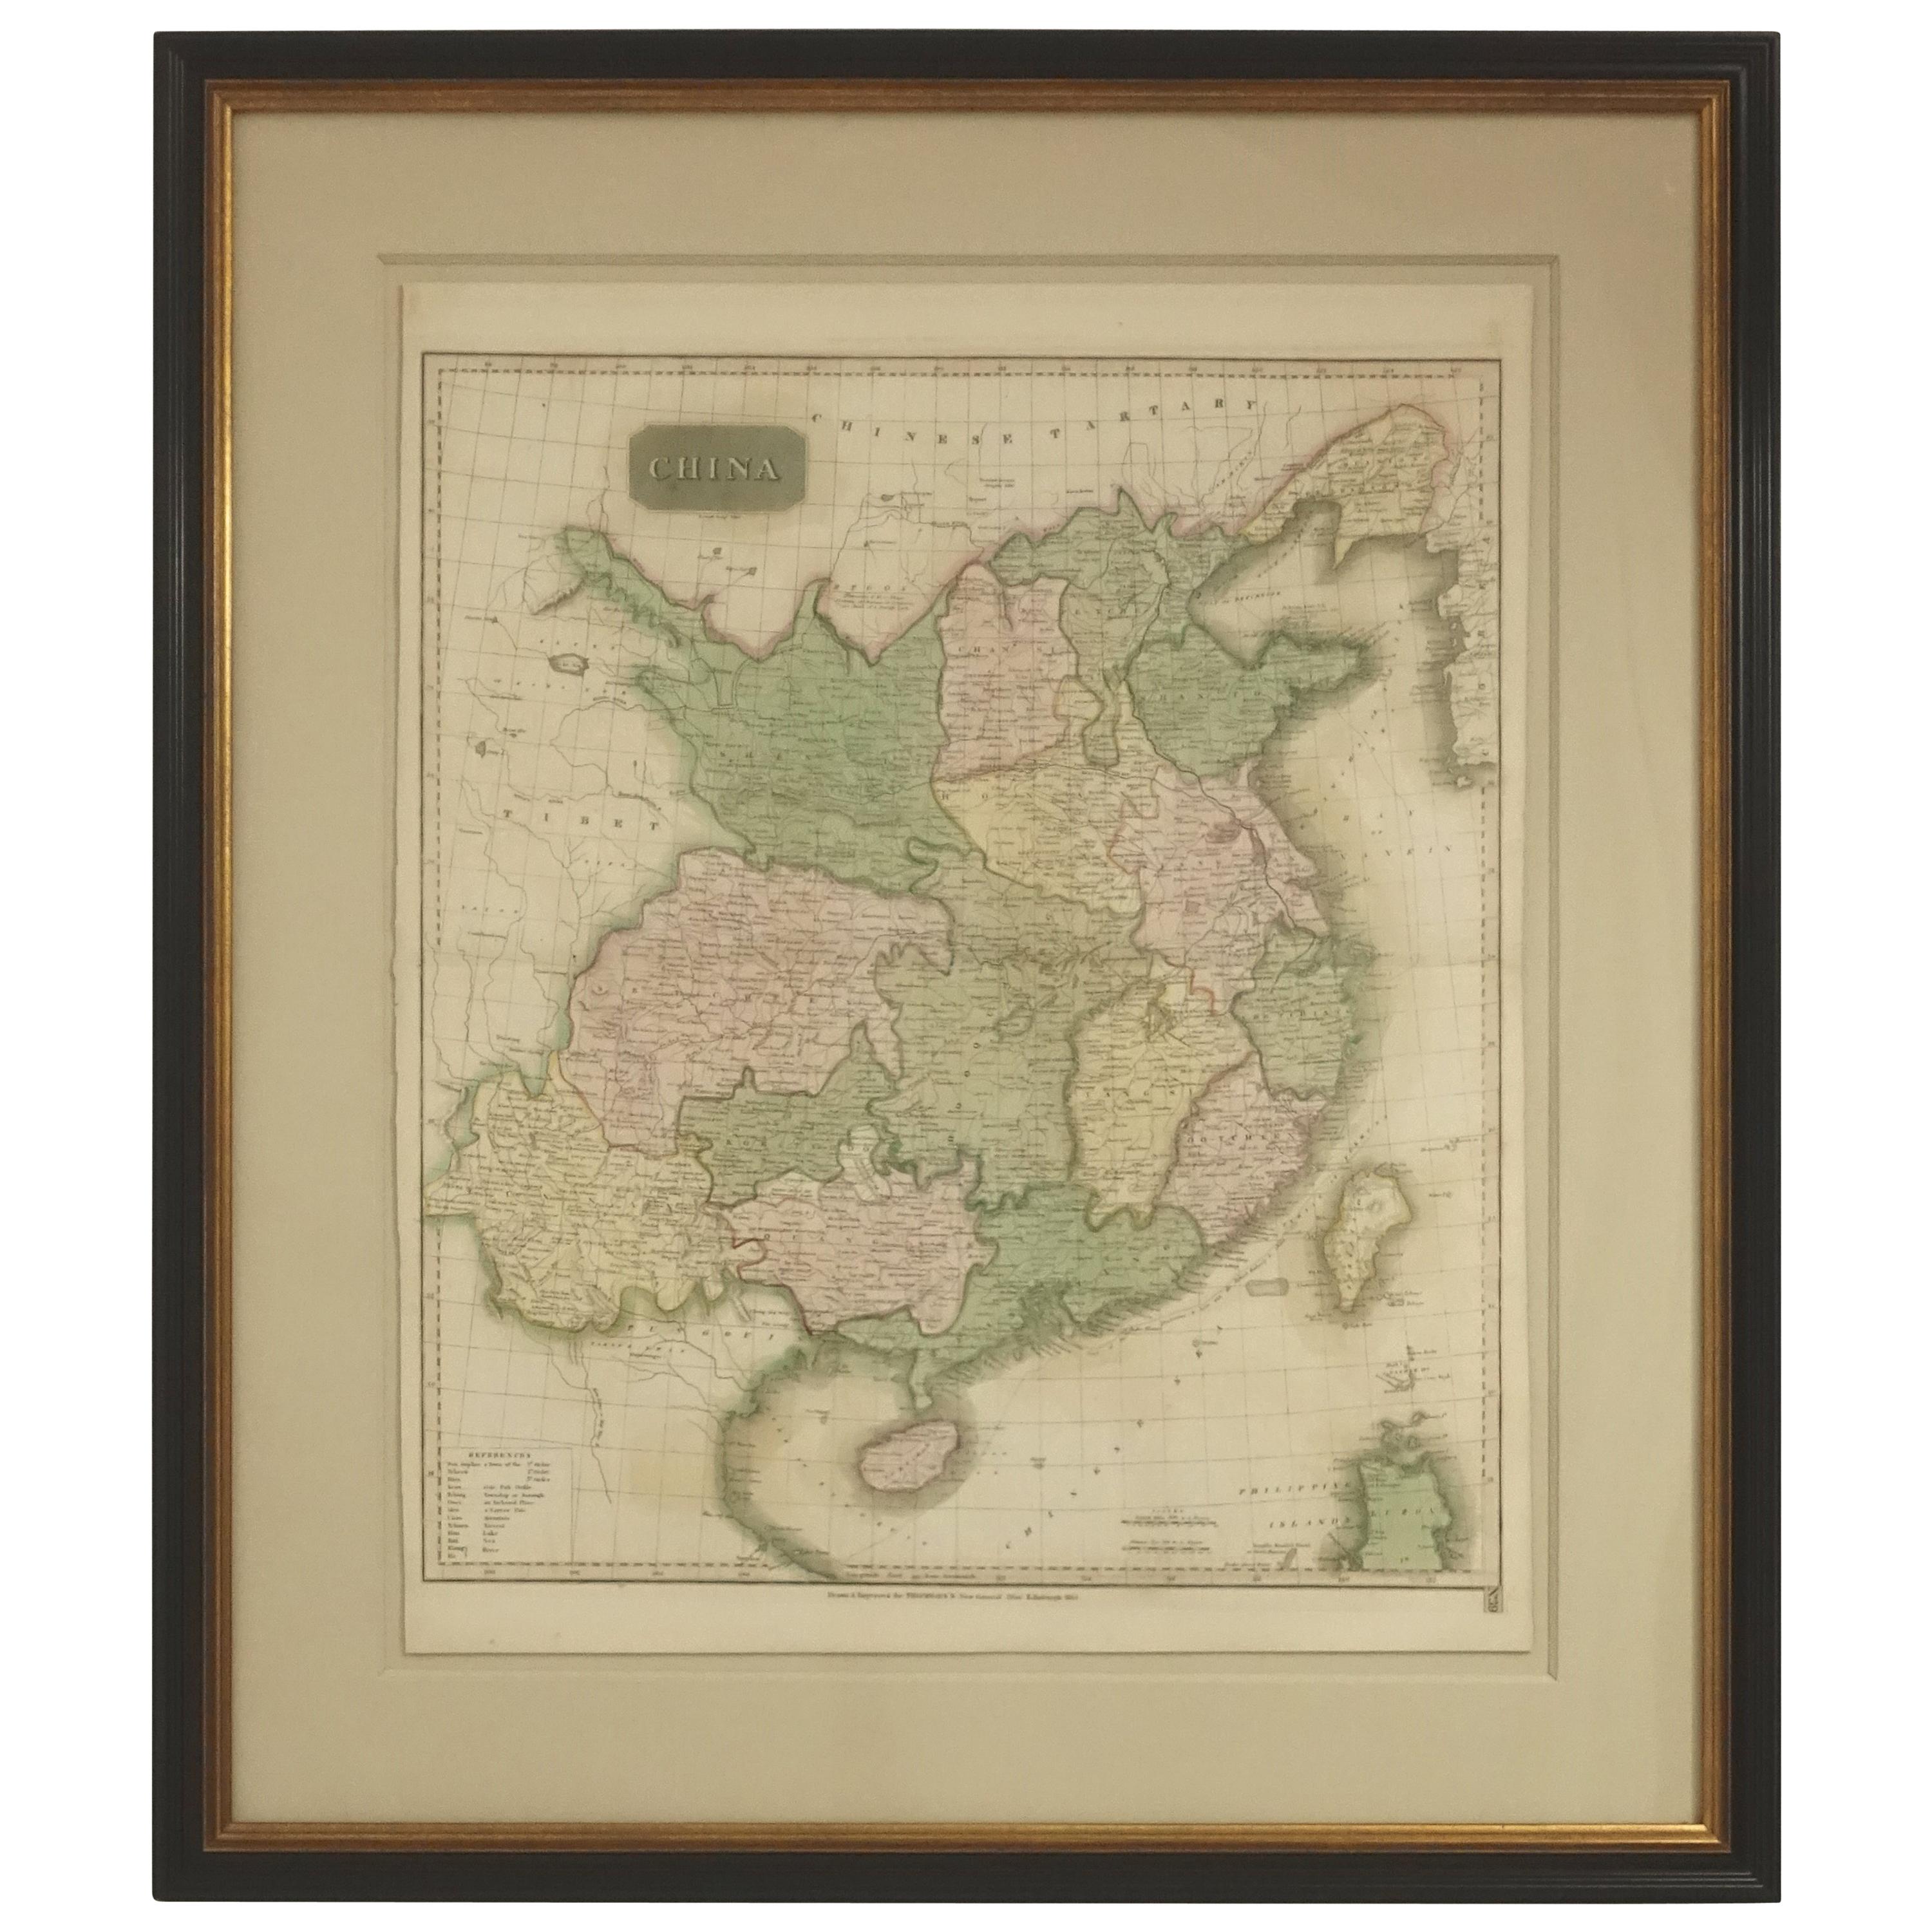 Framed Early 19th Century Drawn and Engraved Map of China